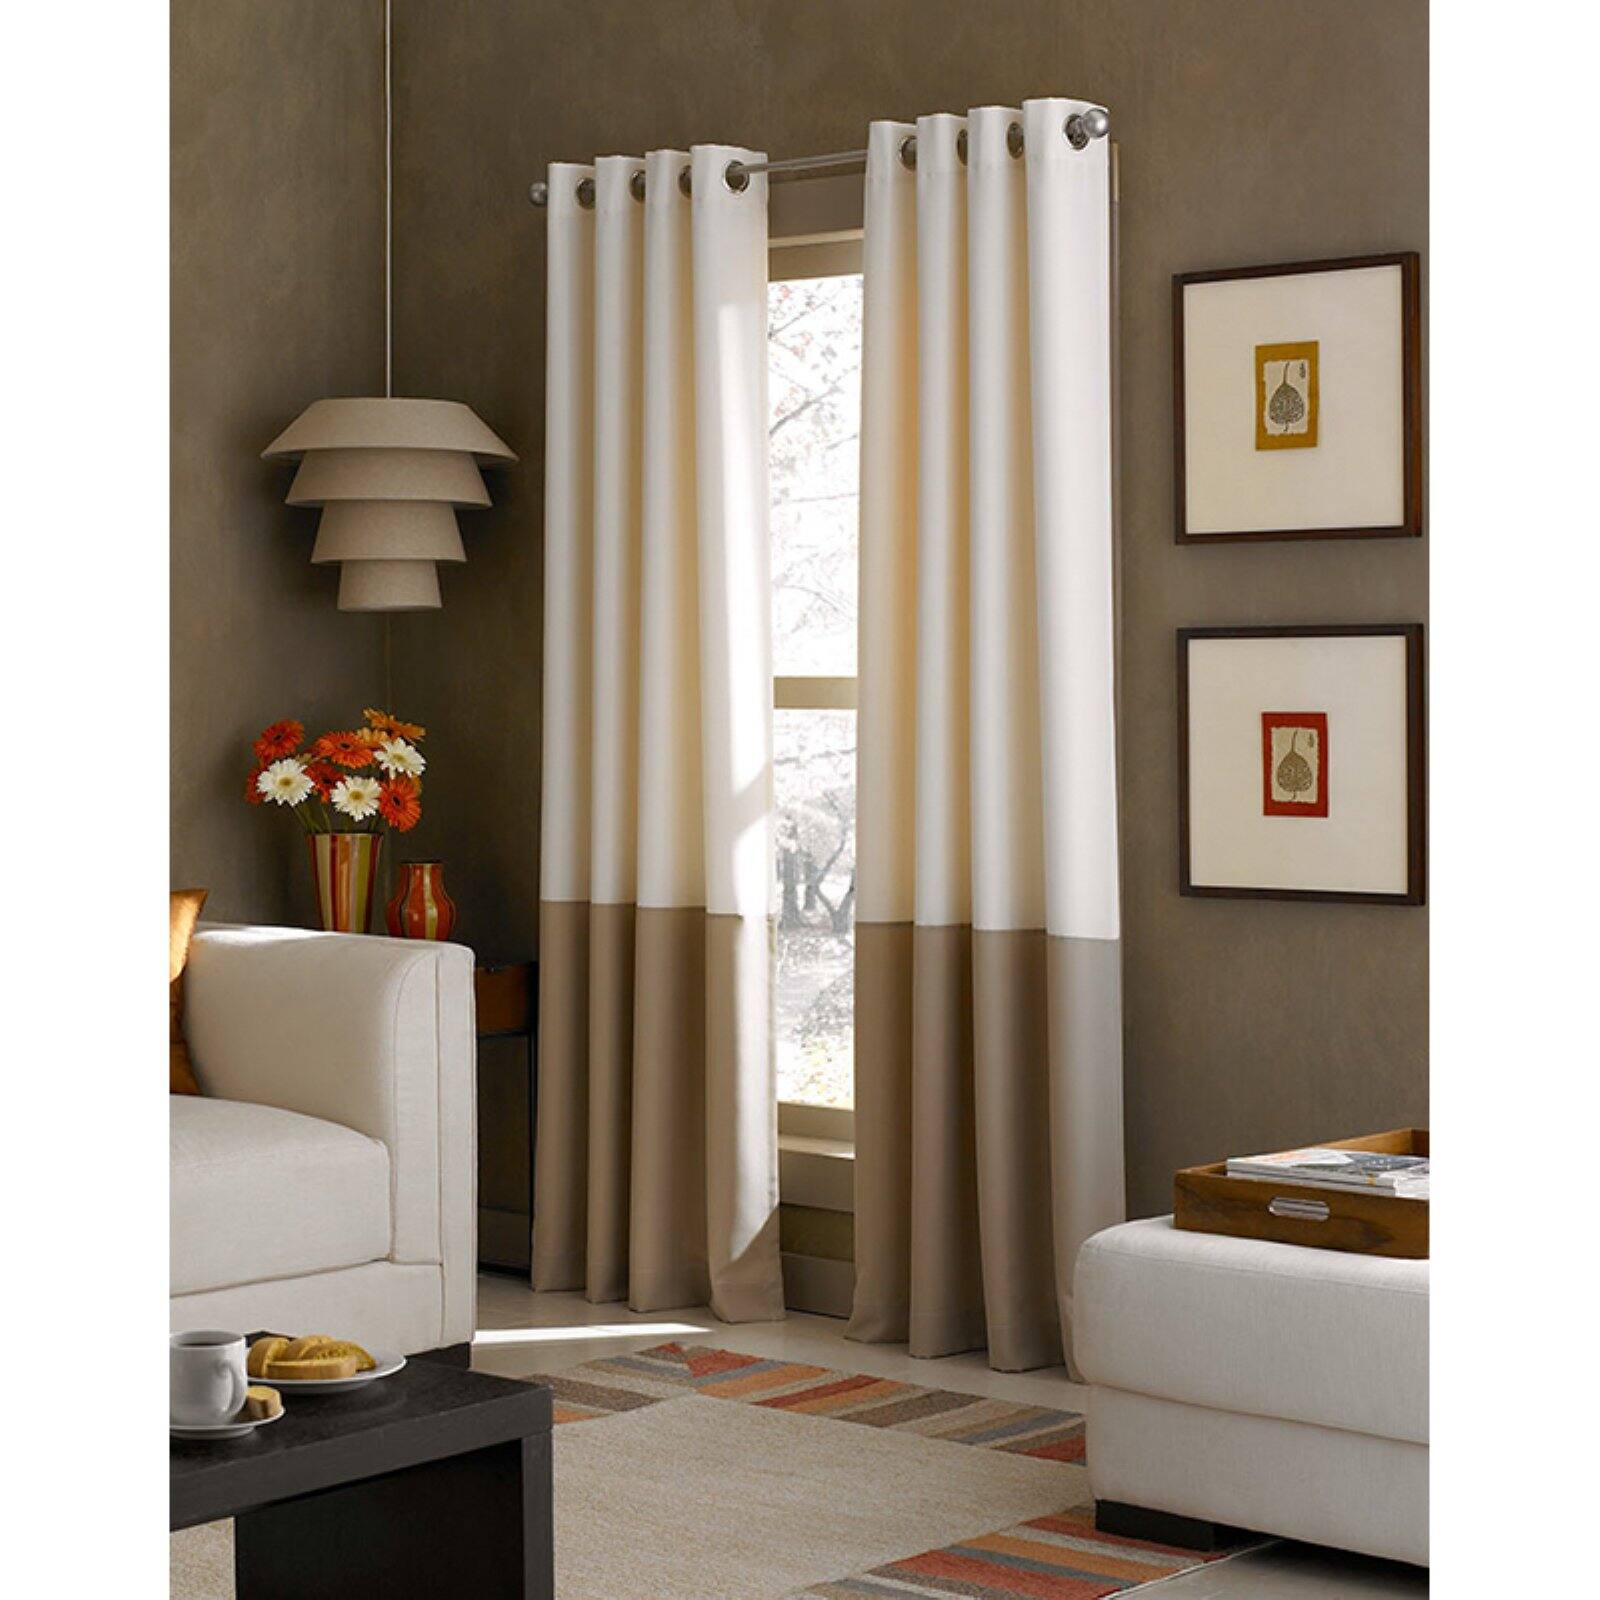 Curtainworks Traditional Solid Print Grommet Curtain Panel, 52" x 63" - image 2 of 6